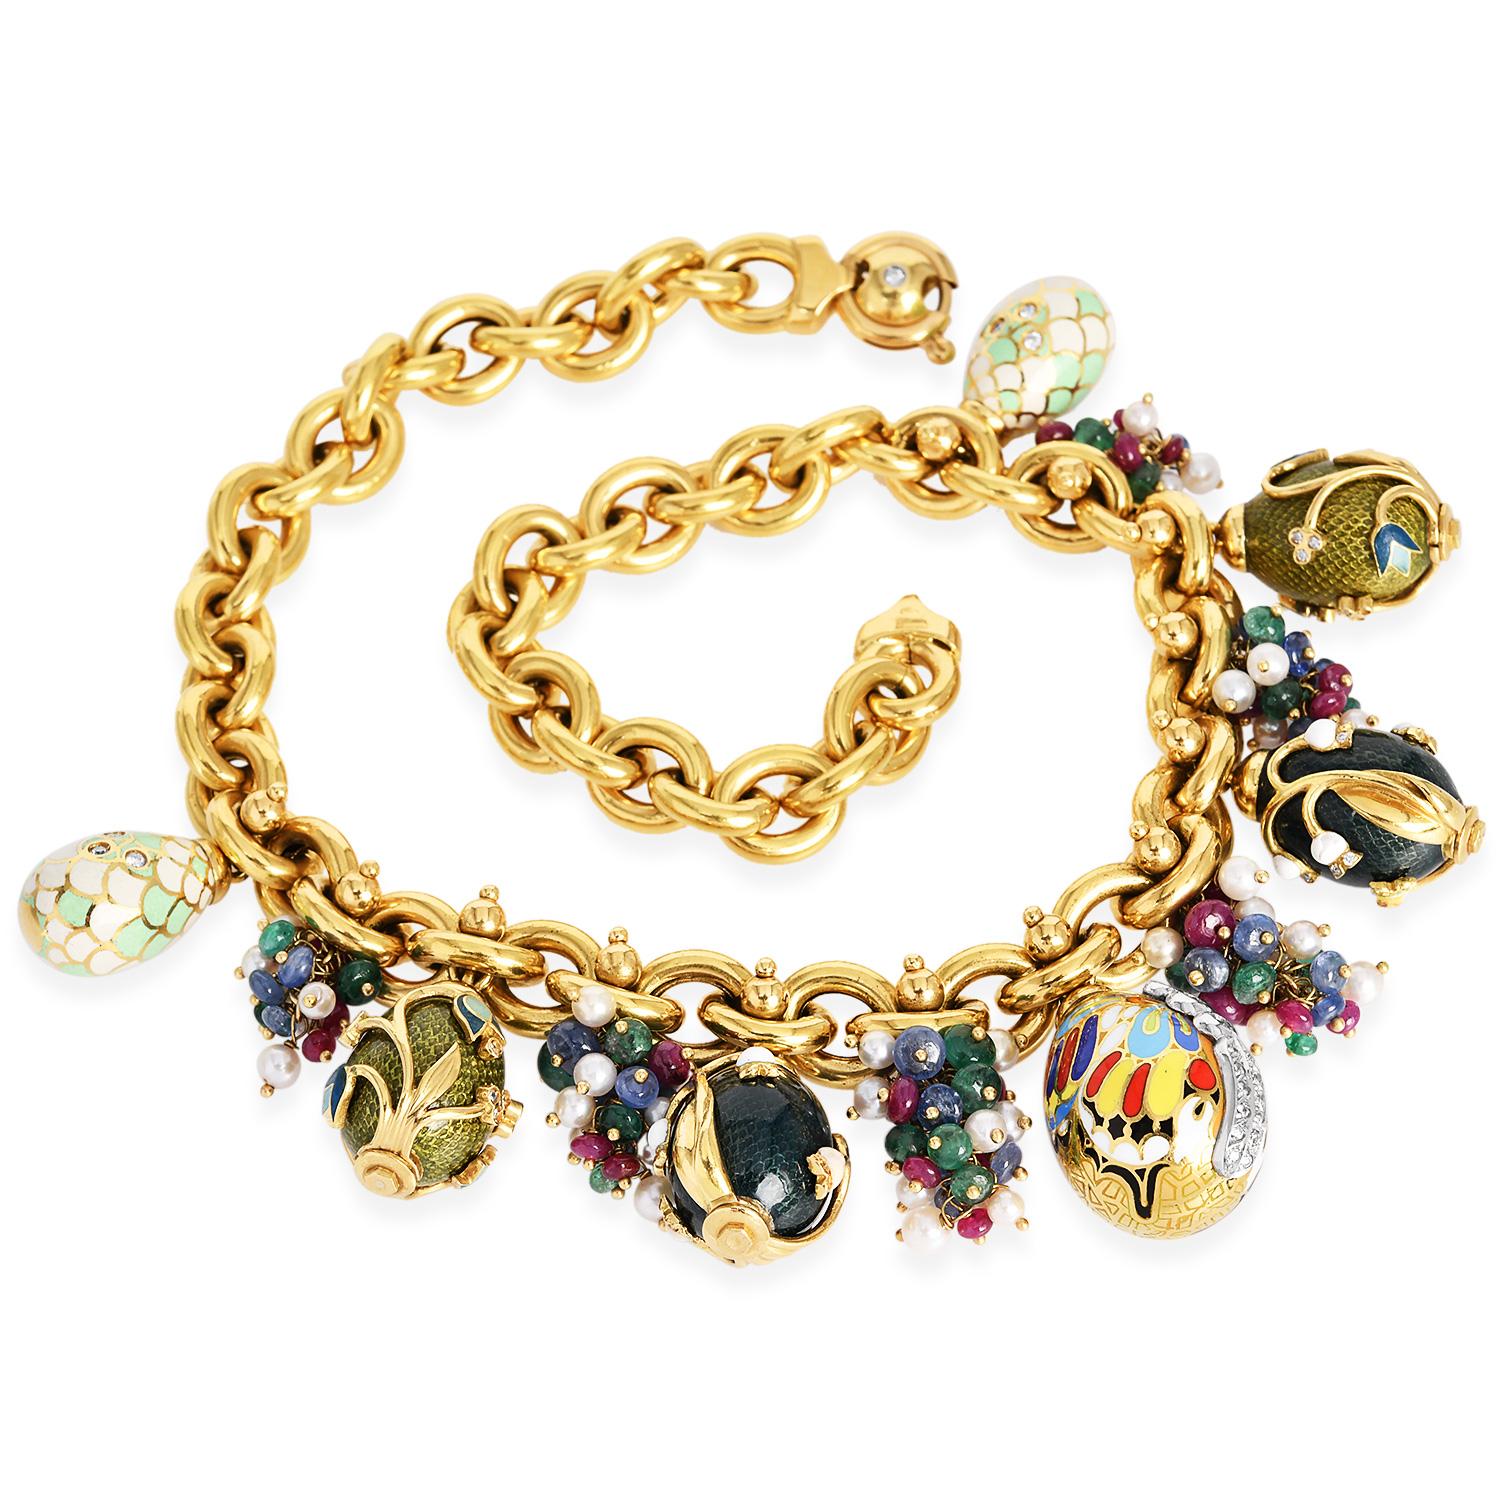 Presenting a Statement necklace crafted in 18K Yellow oval links with Ruby, emerald, pearl, and sapphire beaded charms alternating natural diamonds and enamel decorated on 18k enameled Eggs Secured with a spring ring with Diamond Clasp. 

Metal: 18K